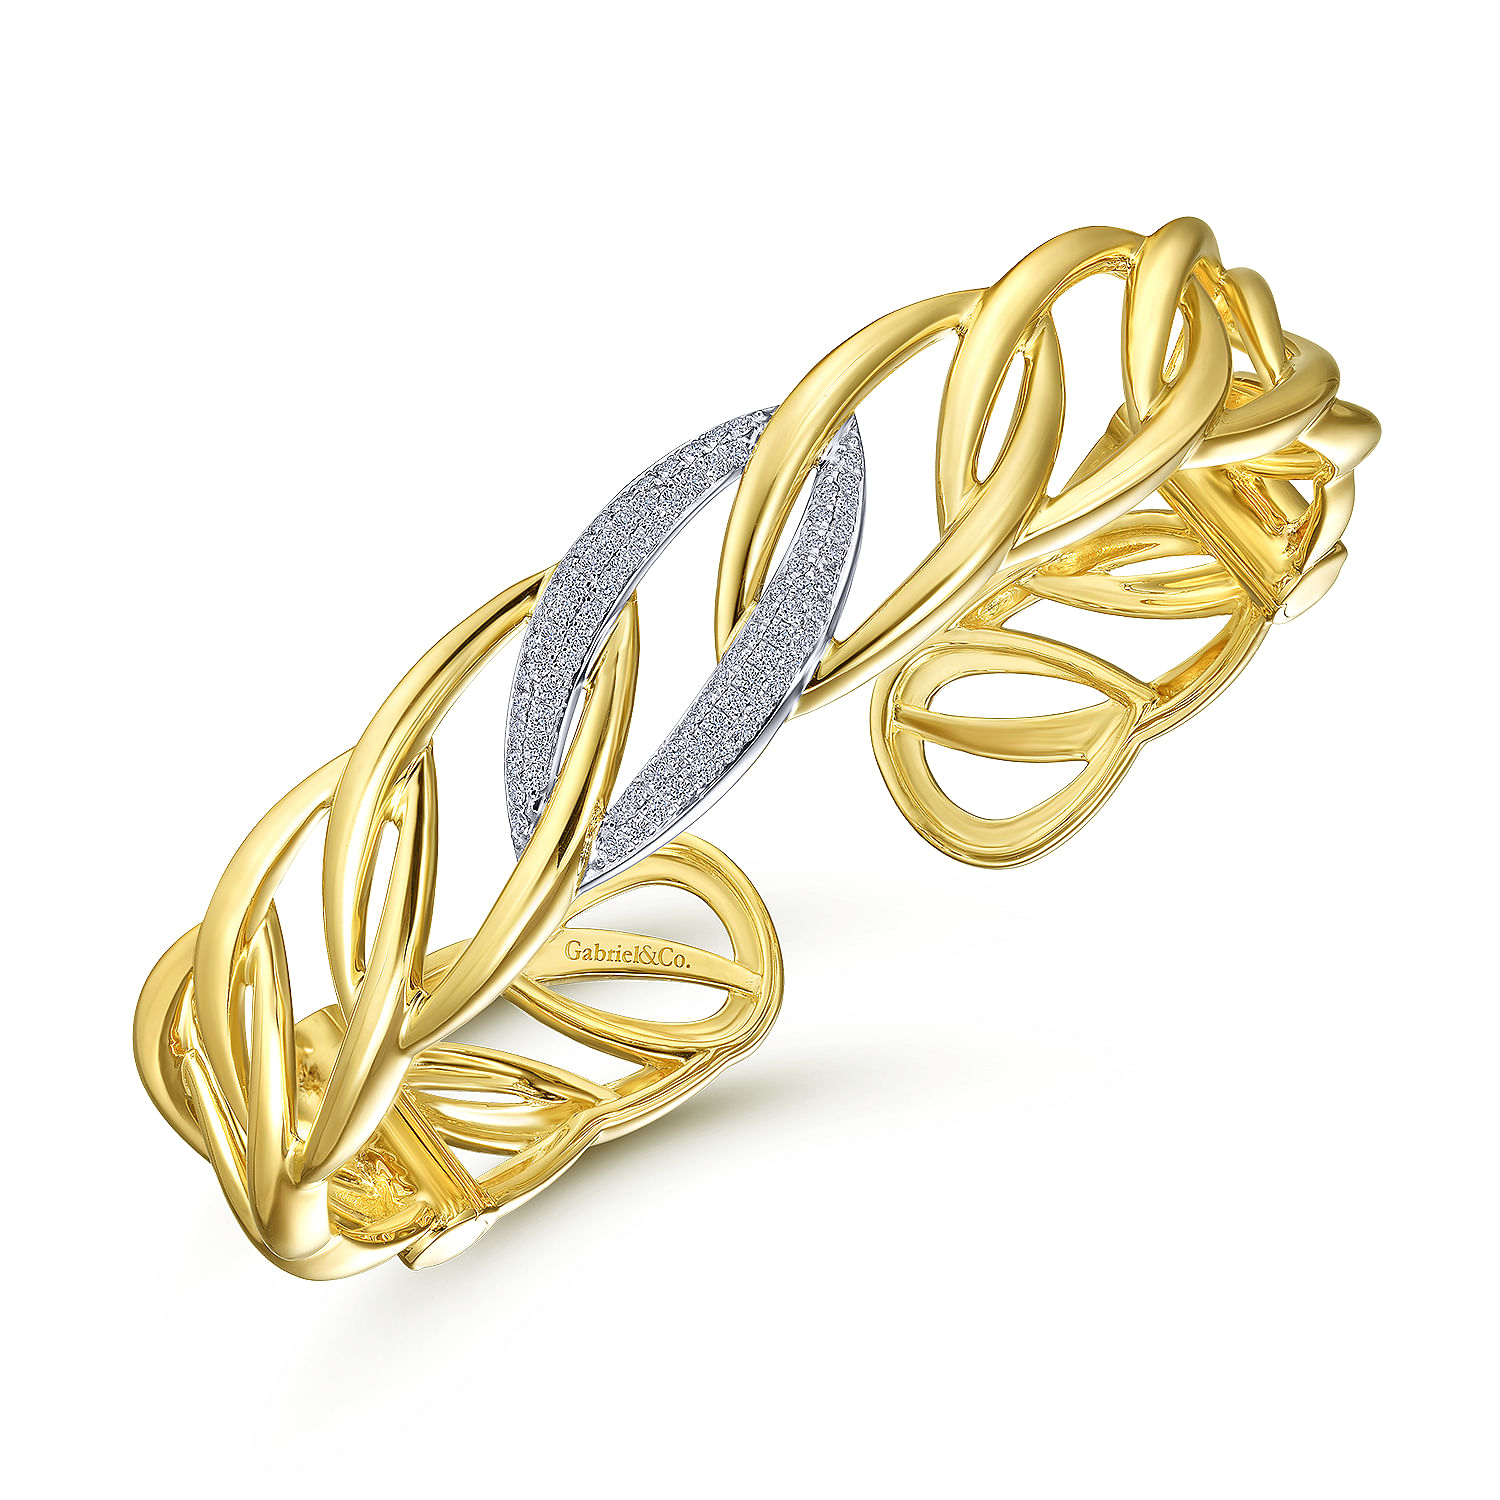 14K Yellow Gold Chain Link Cuff Bracelet with White Gold Pavé Diamond Station